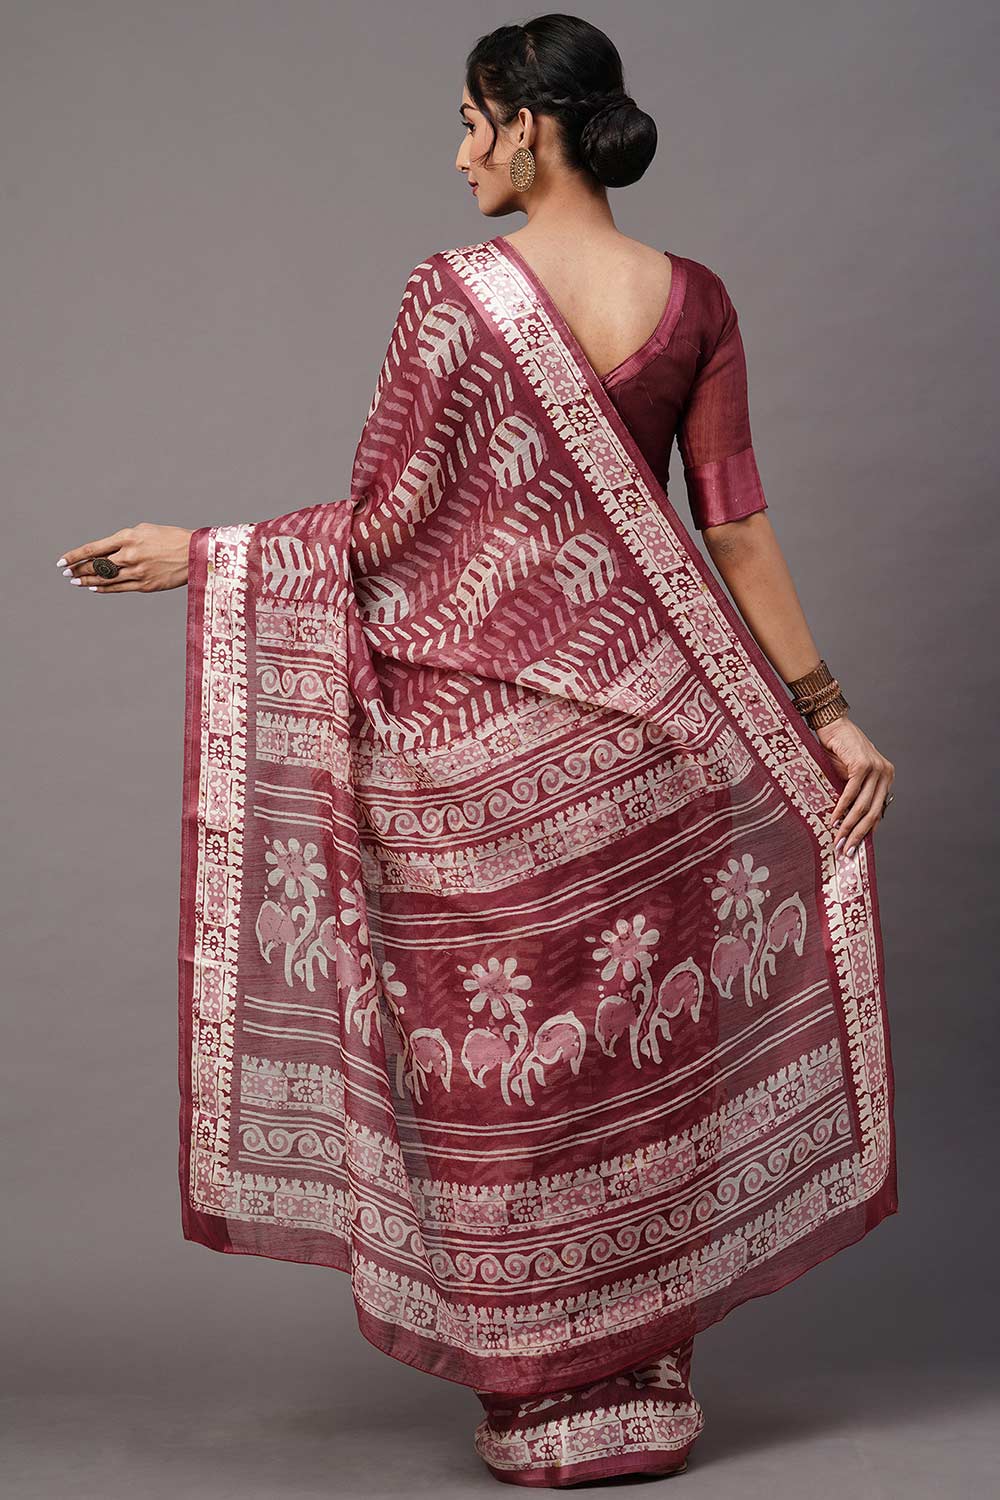 Shop Kaya Cotton Blend Magenta Printed One Minute Saree at best offer at our  Store - One Minute Saree